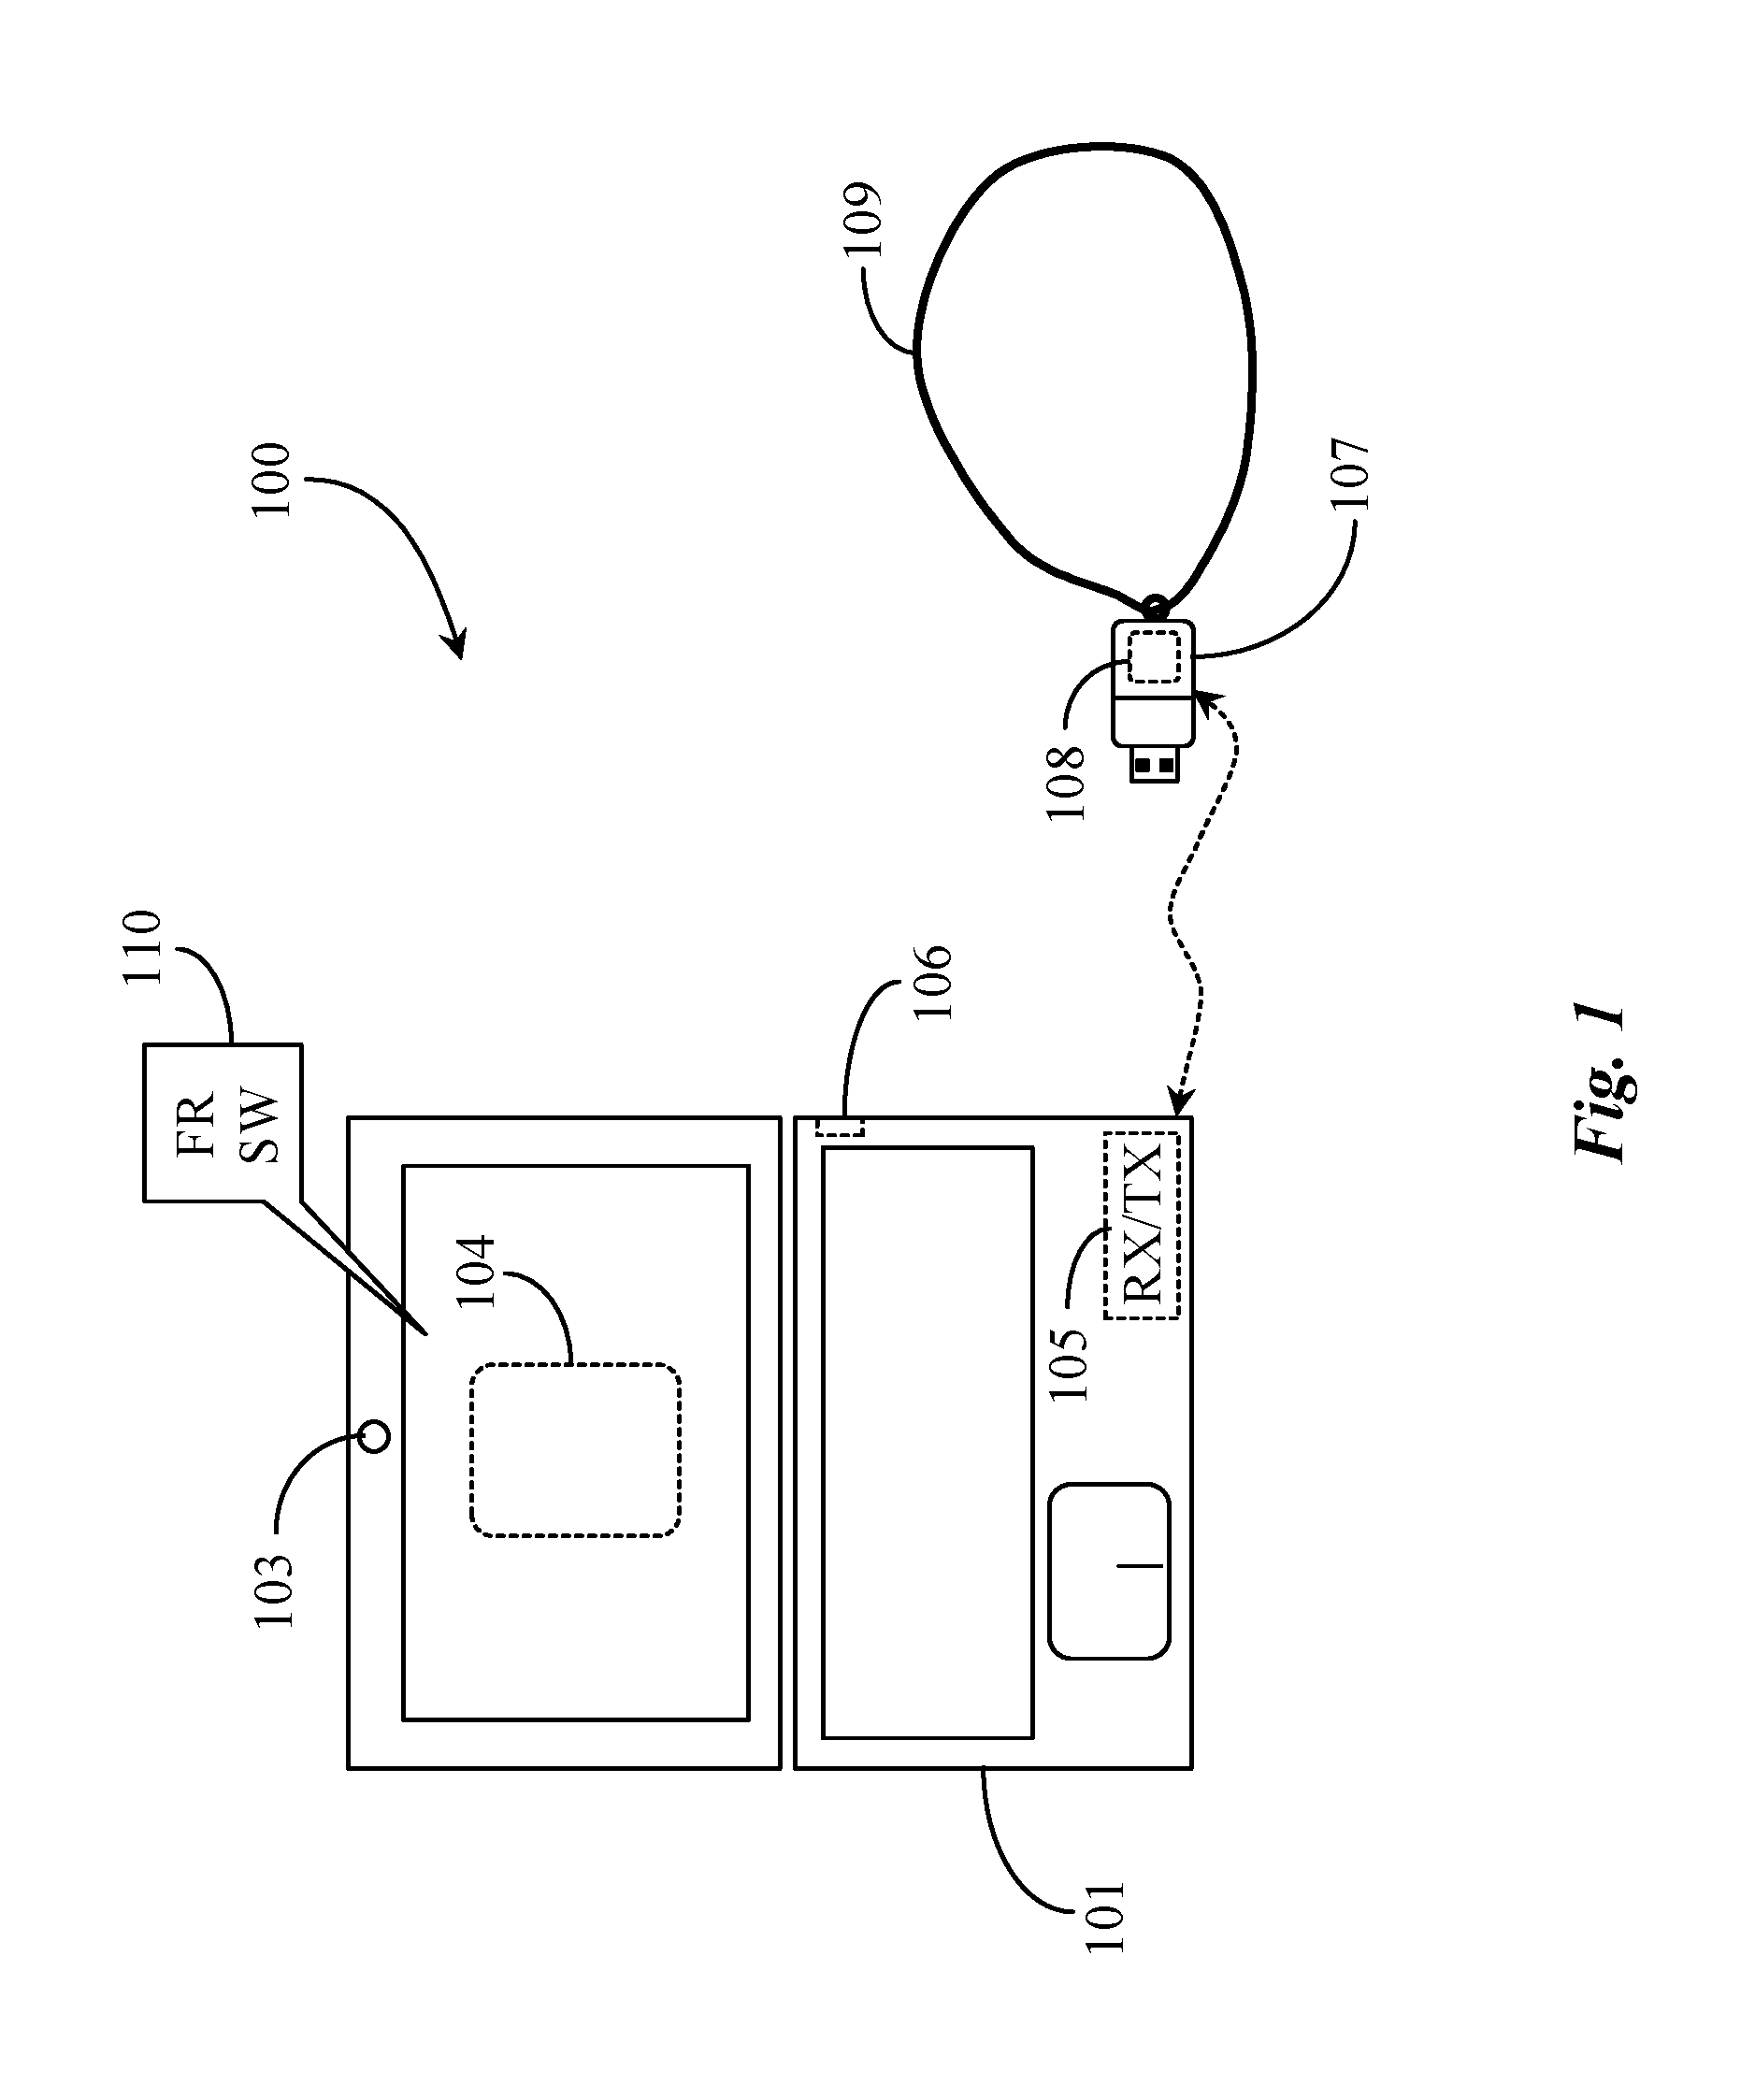 System and Method Identifying a User to an Associated Device